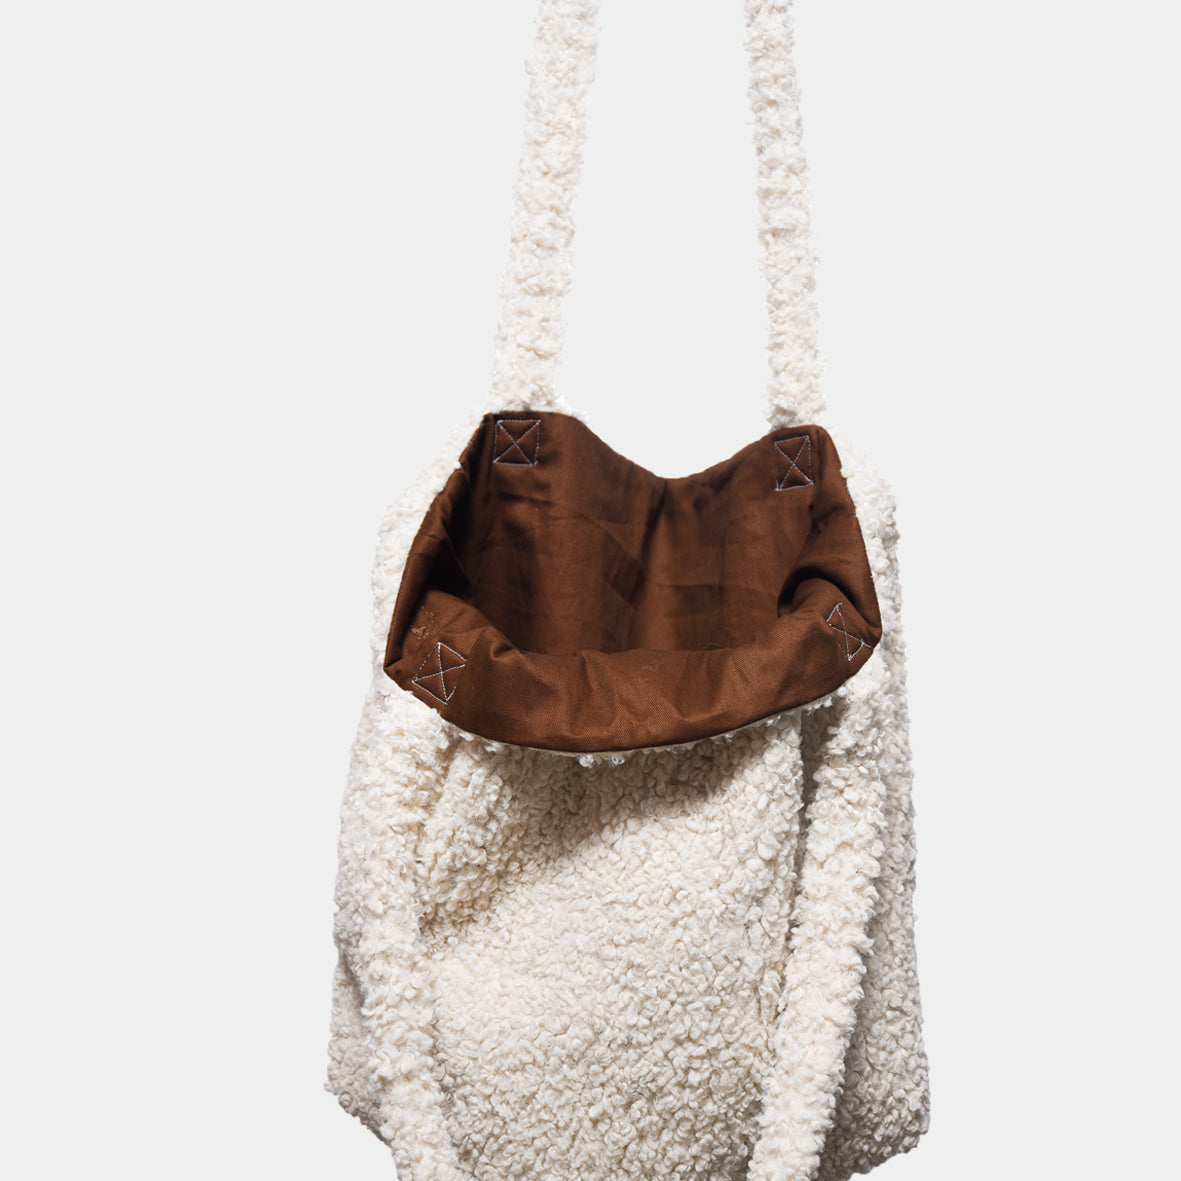 Teddy tote bag, off white colour with brown drill fabric lining. Hand made in New Zealand.